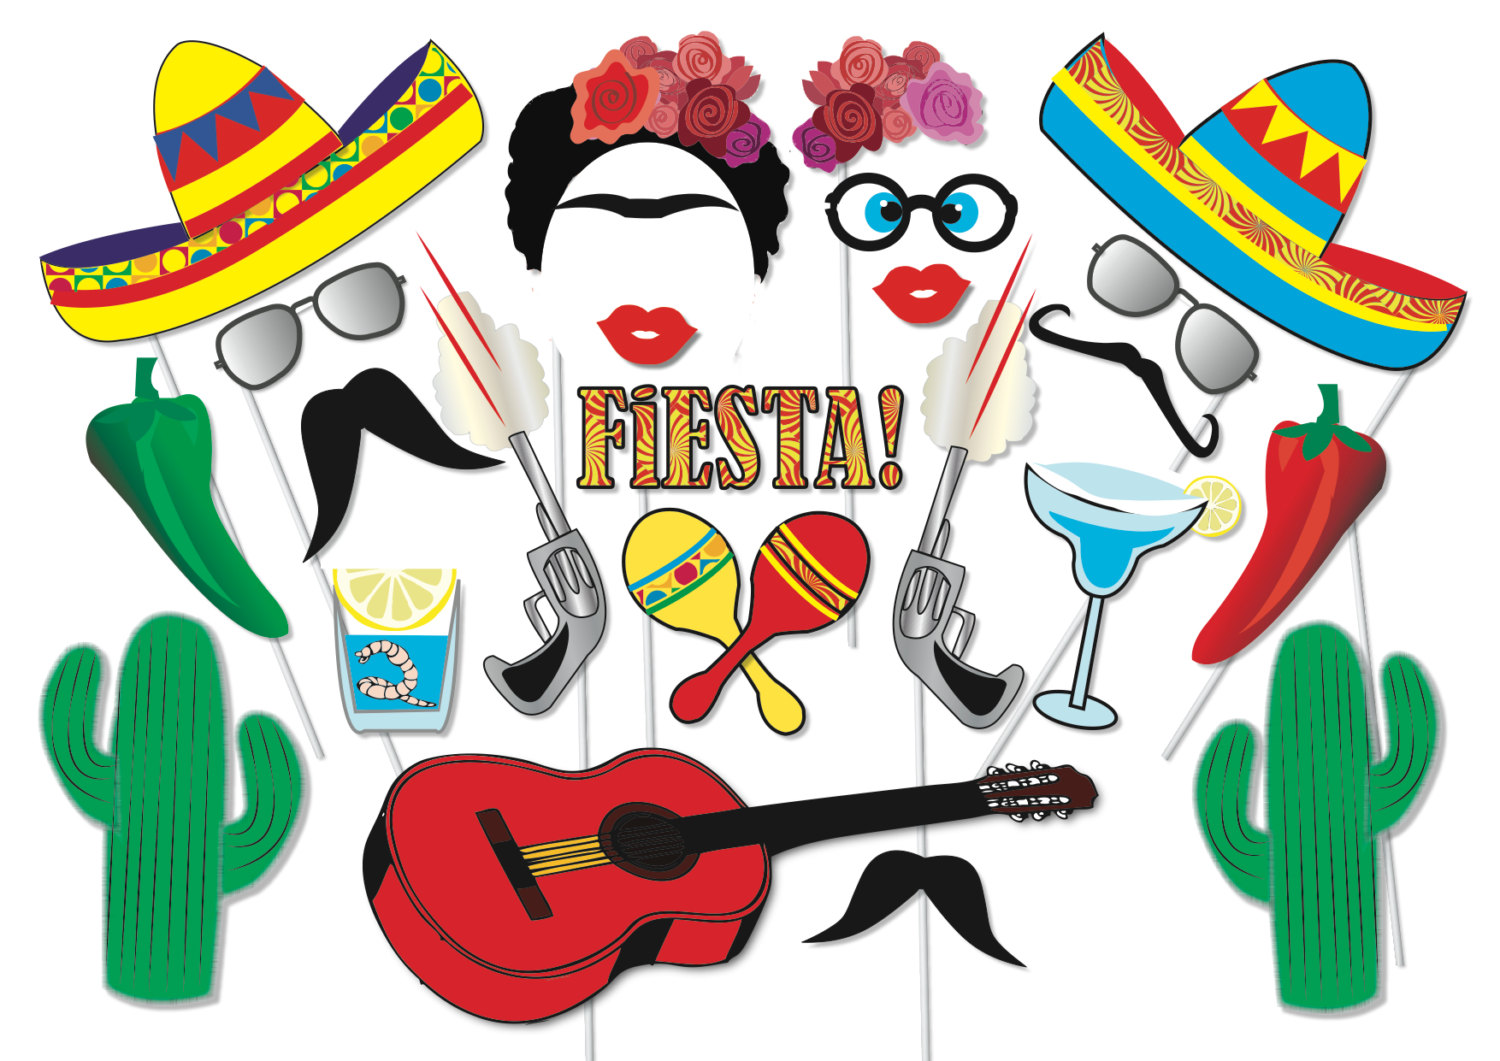 1000+ images about Fiesta Mexicana | Mexican fiesta ...